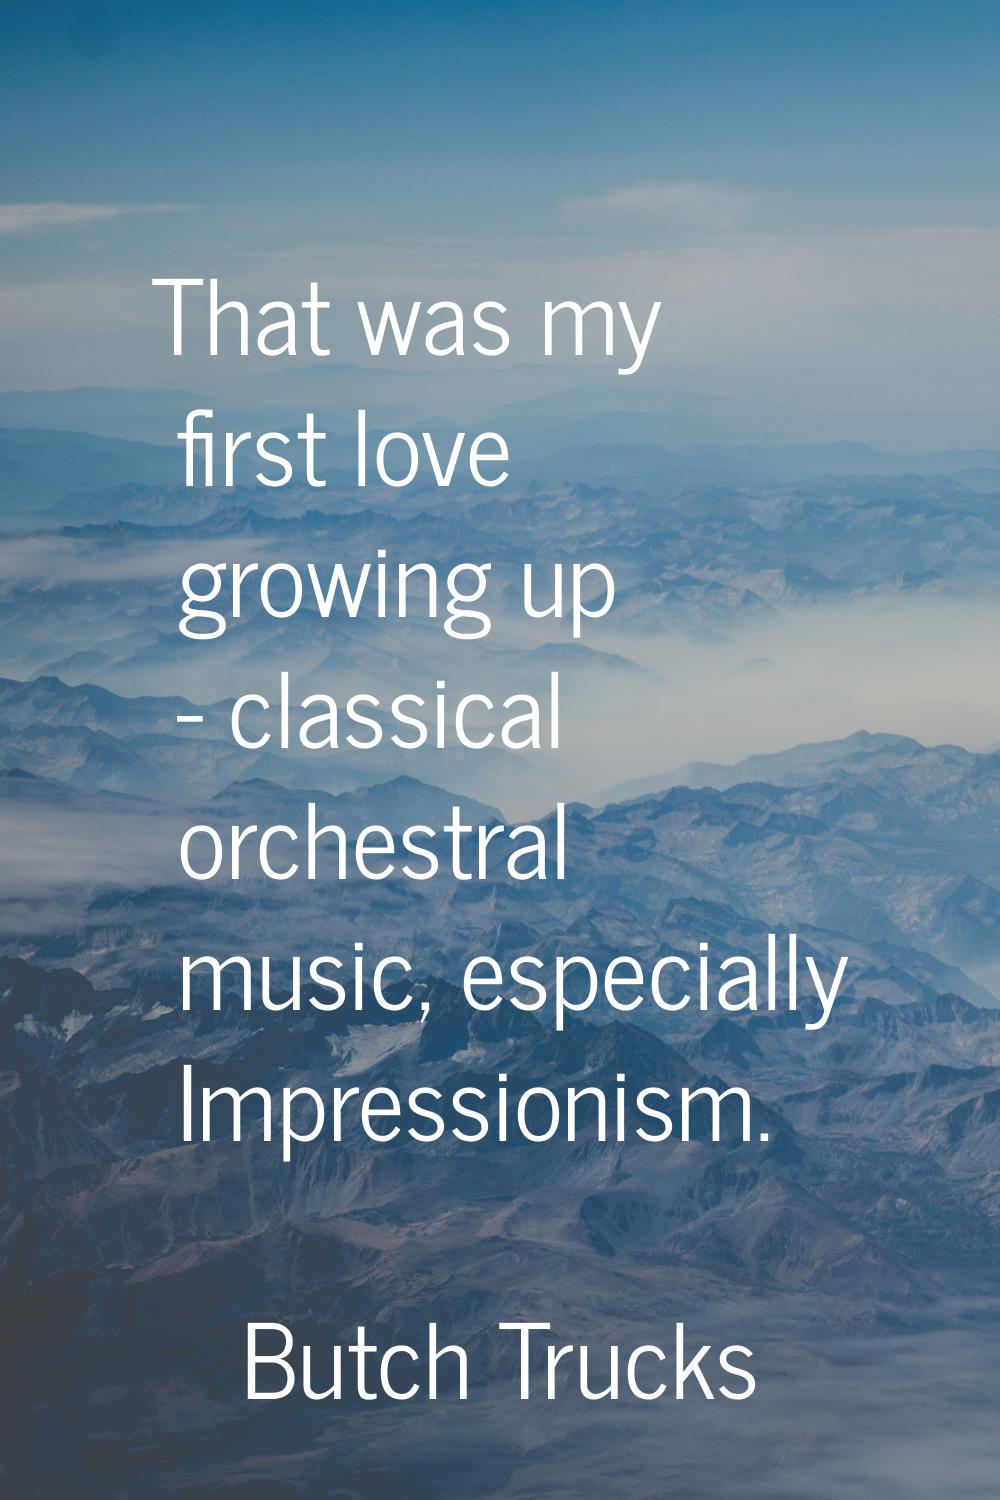 That was my first love growing up - classical orchestral music, especially Impressionism.